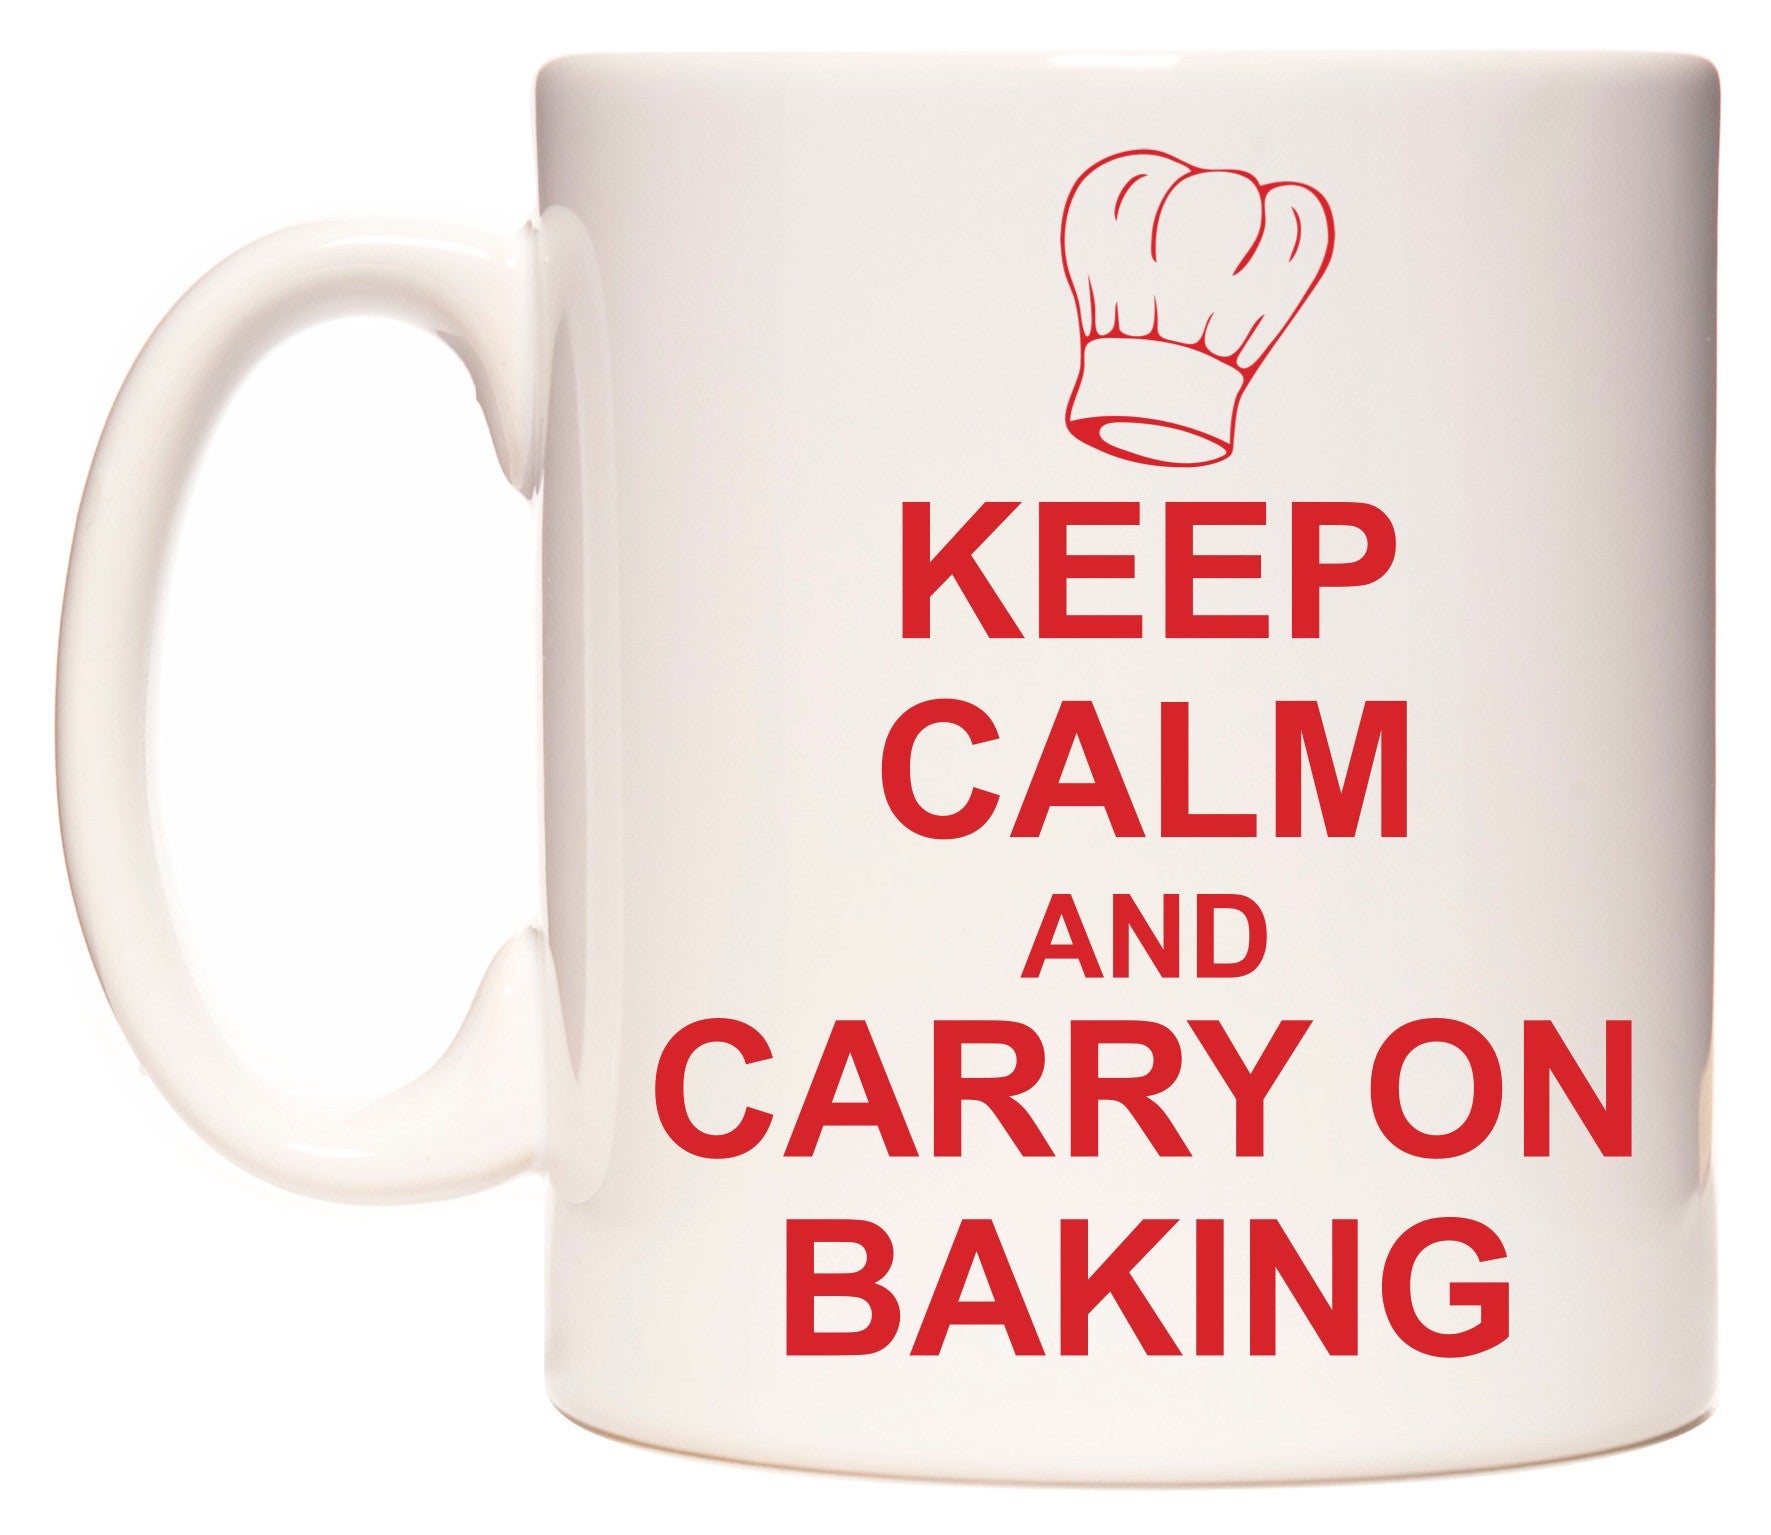 This mug features Keep Calm And Carry On Baking